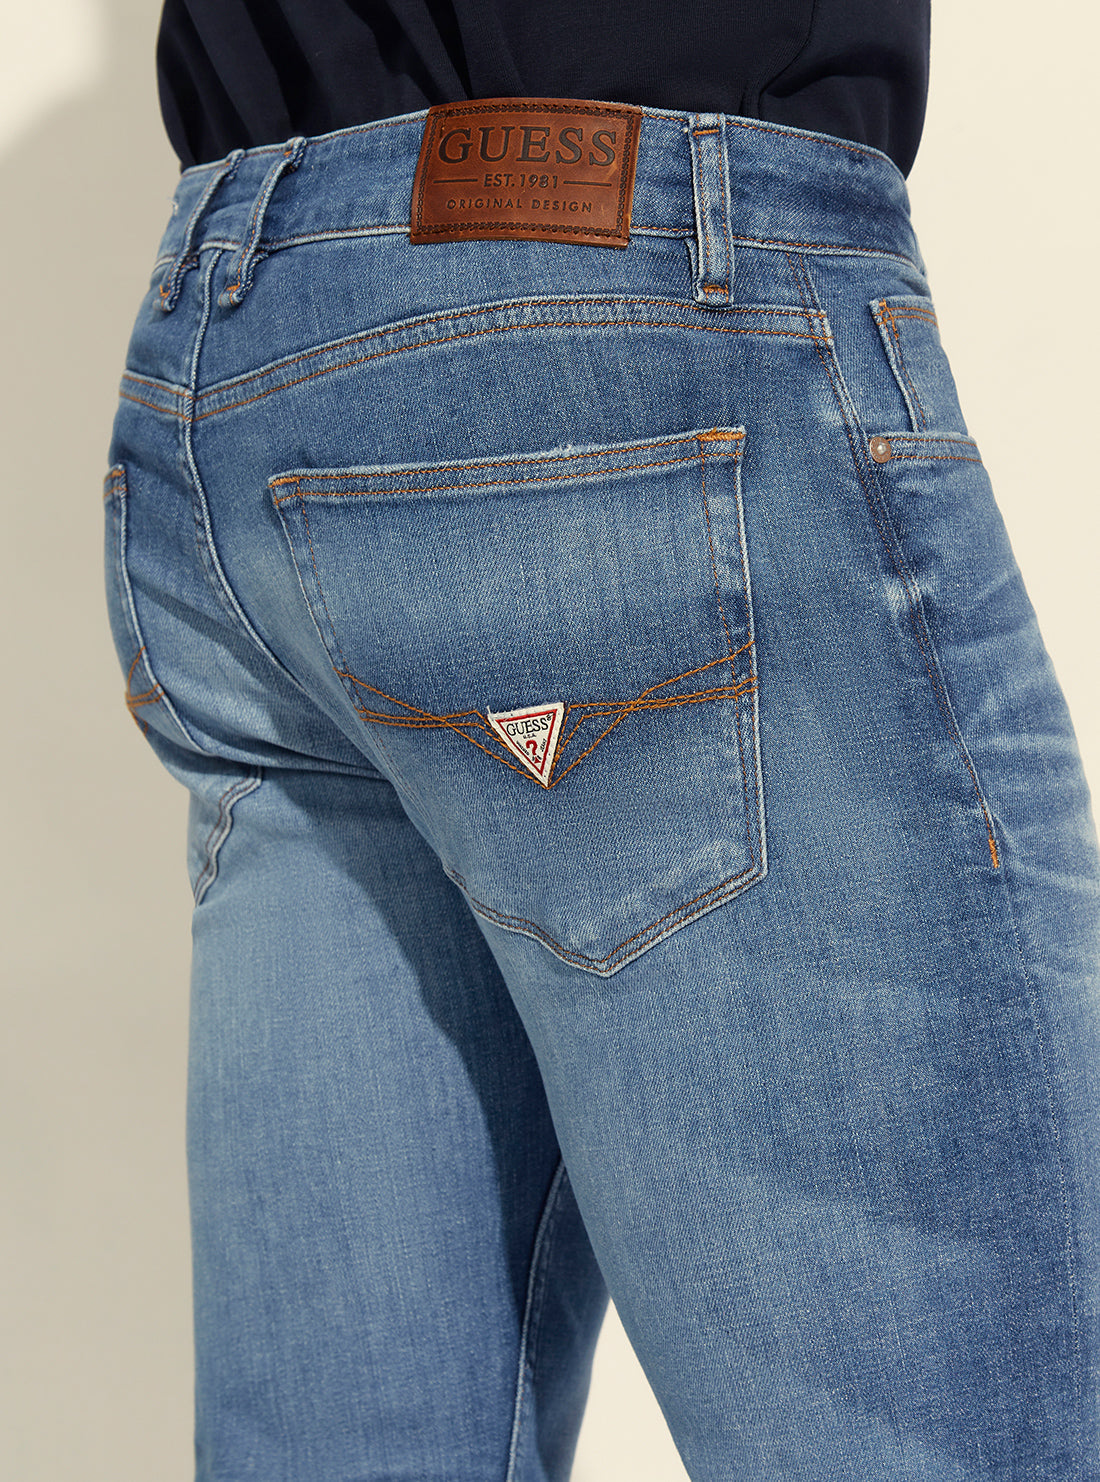 GUESS Mens Mid-Rise Slim Tapered Denim Jeans in Mayport Wash M2RAS2D46AE Detail View